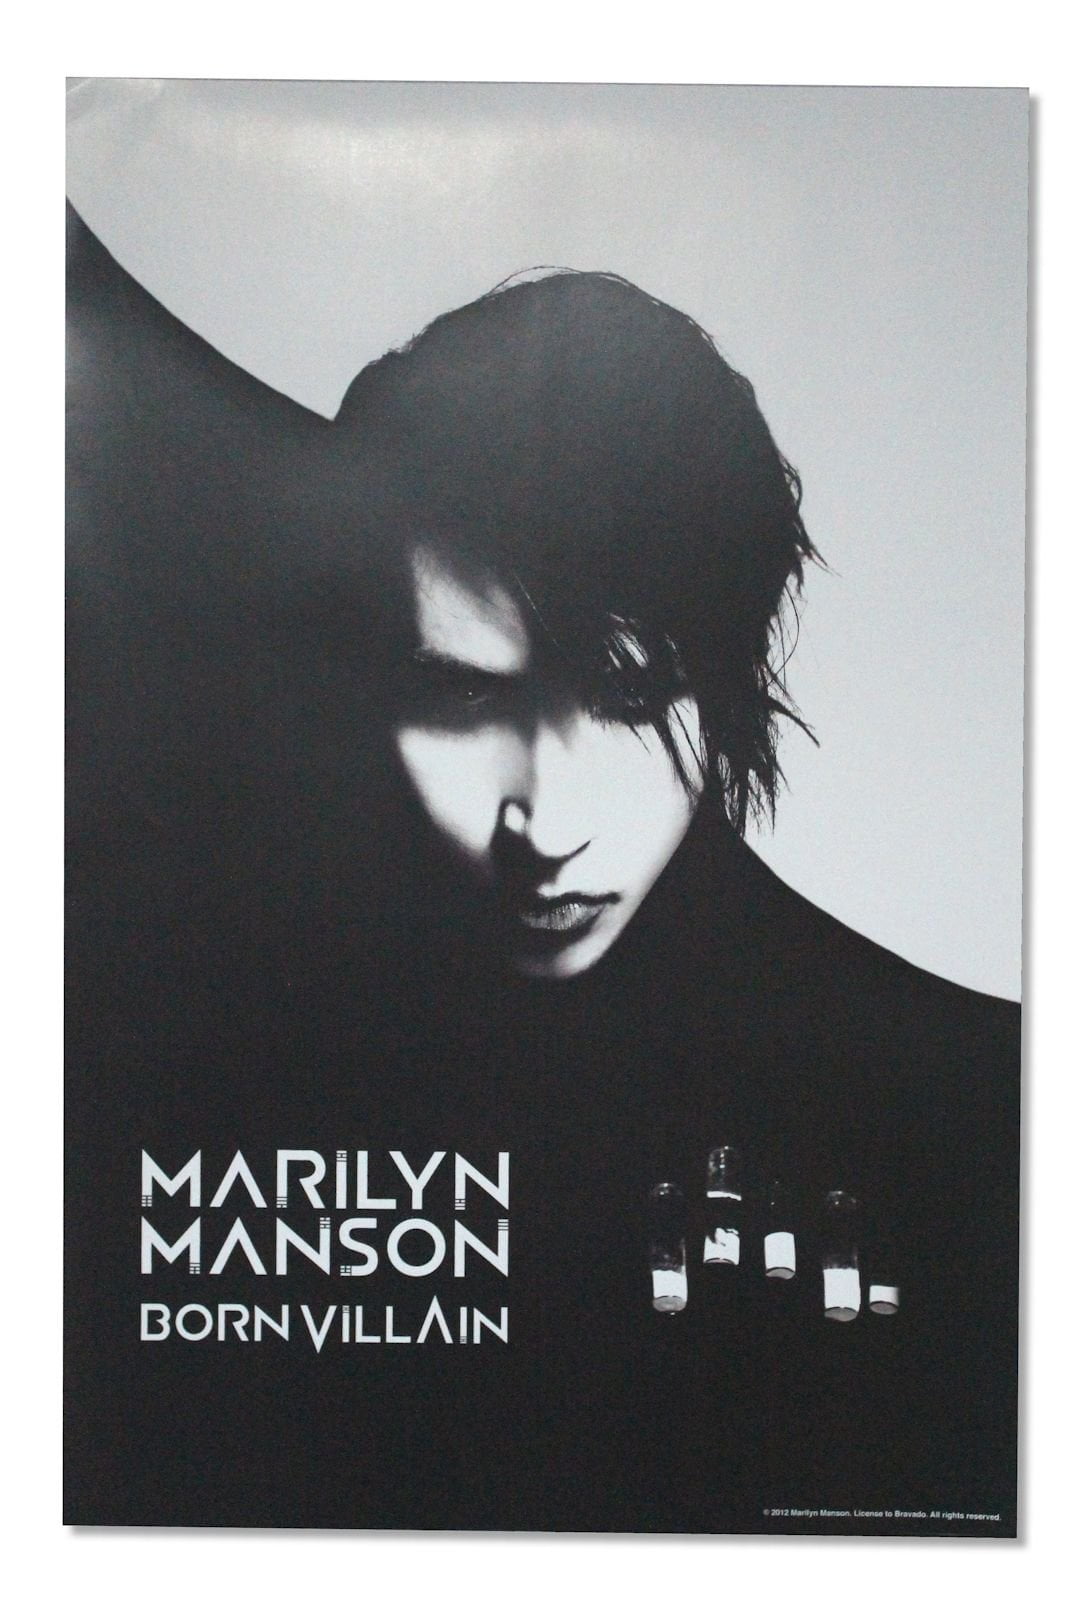 Marilyn Manson Born Villain Black & White Wall Poster Lithograph New Official 